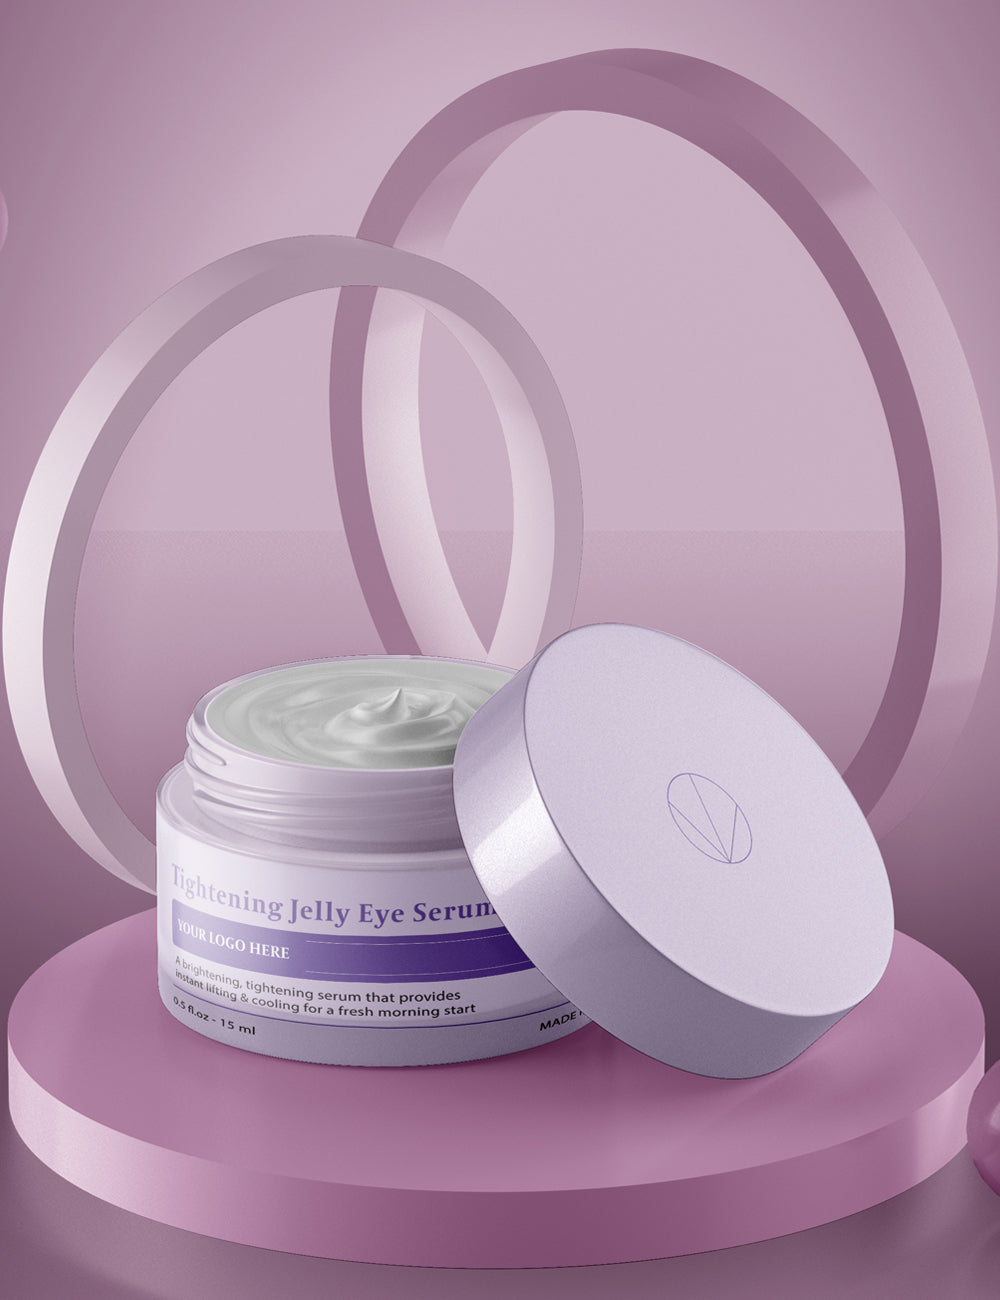 Consitstency Club beauty product purple jar design example